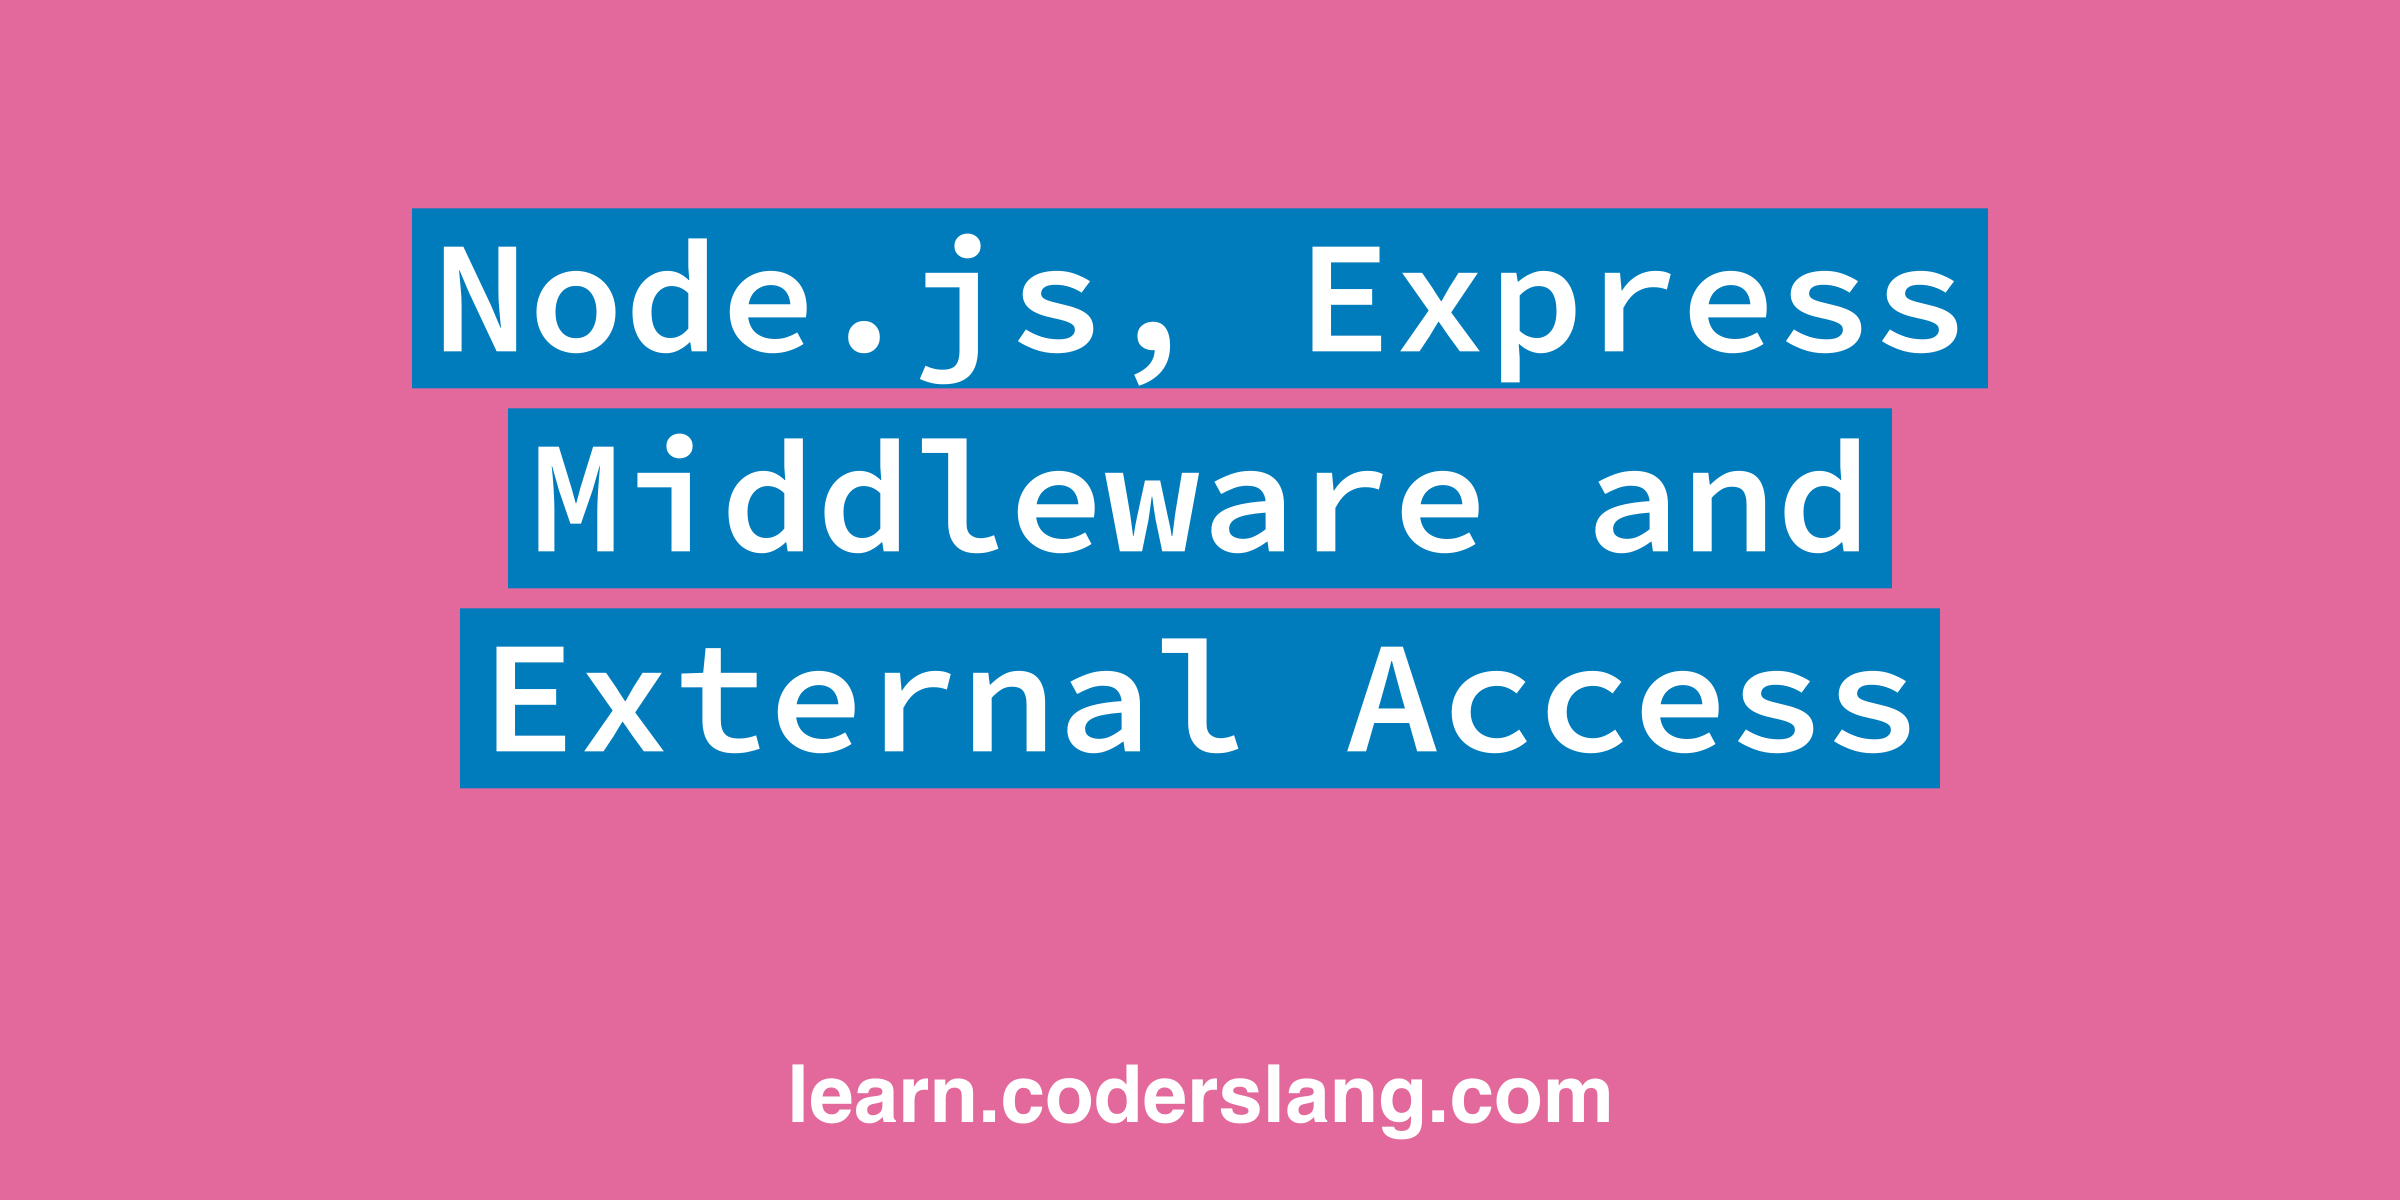 , Express Middleware and External Access